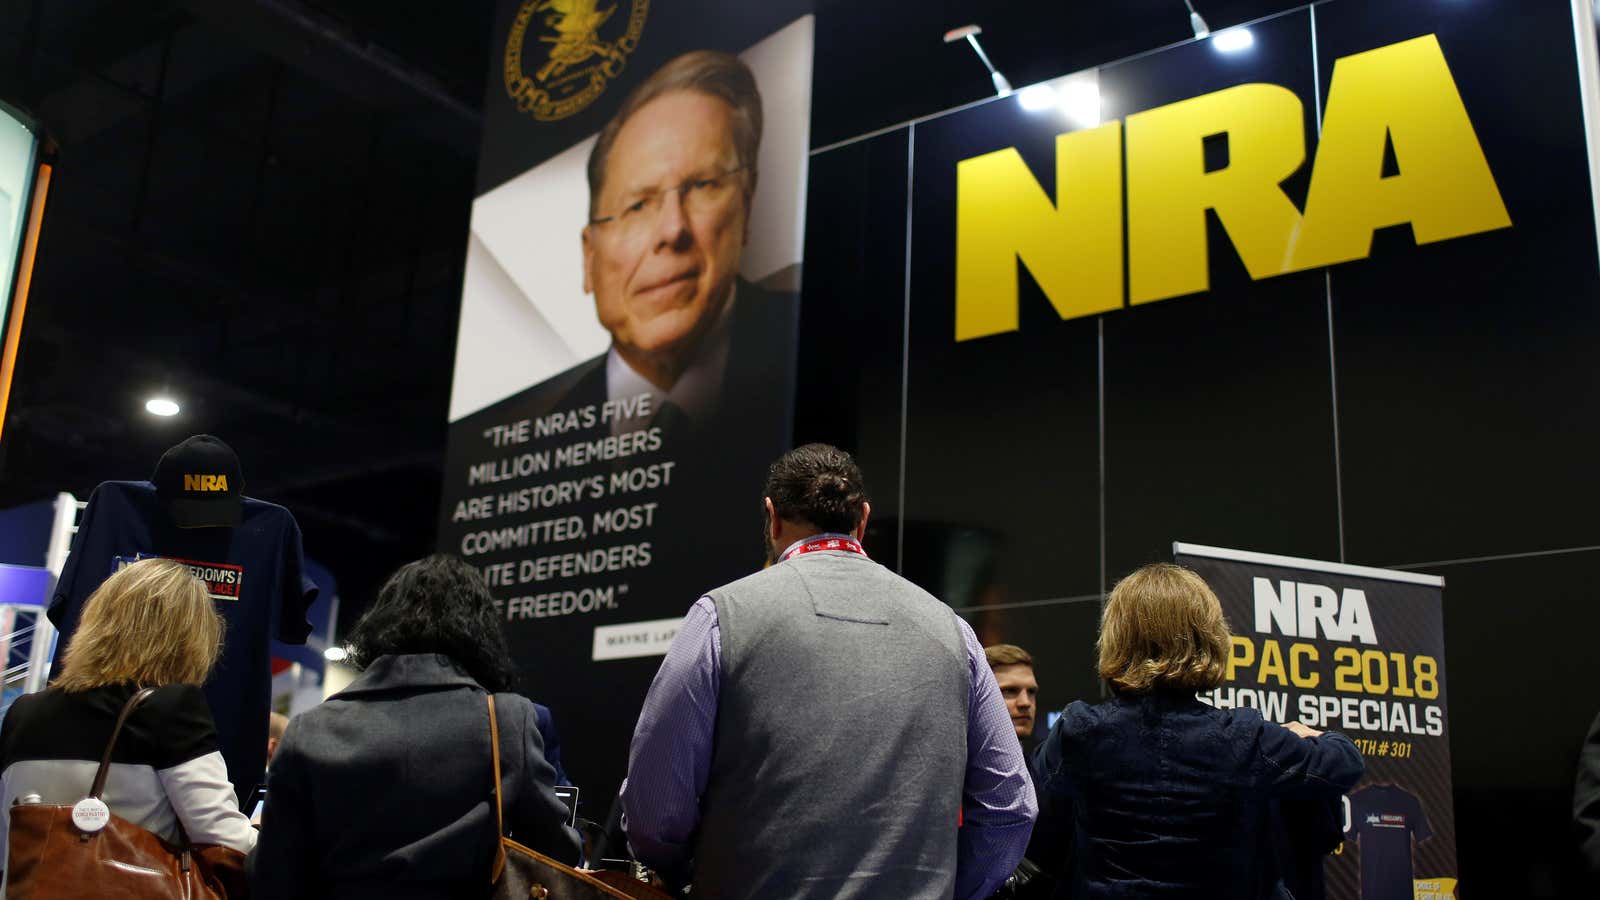 The NRA’s booth at the Conservative Political Action Committee meeting.